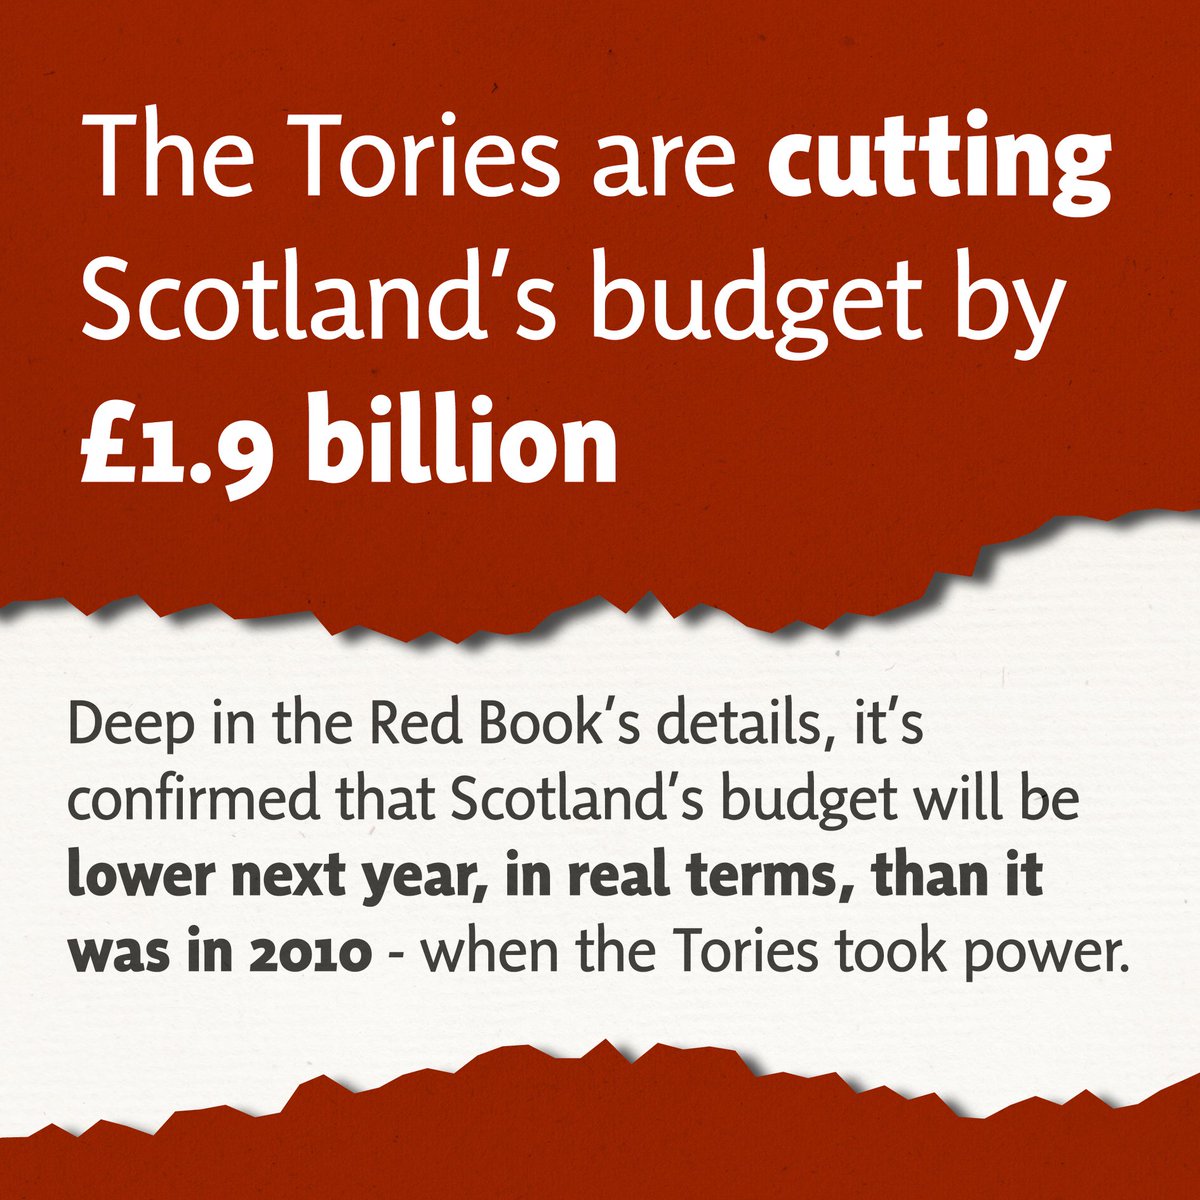 What Philip Hammond didn't mention during his budget statement: the Tories are cutting Scotland's budget by £1.9 billion. #Budget18
Which really is'nt that surprising, What is surprising is that some folk in Scotland will still blindly vote for the toxic Tories.
#AreYouYesYet